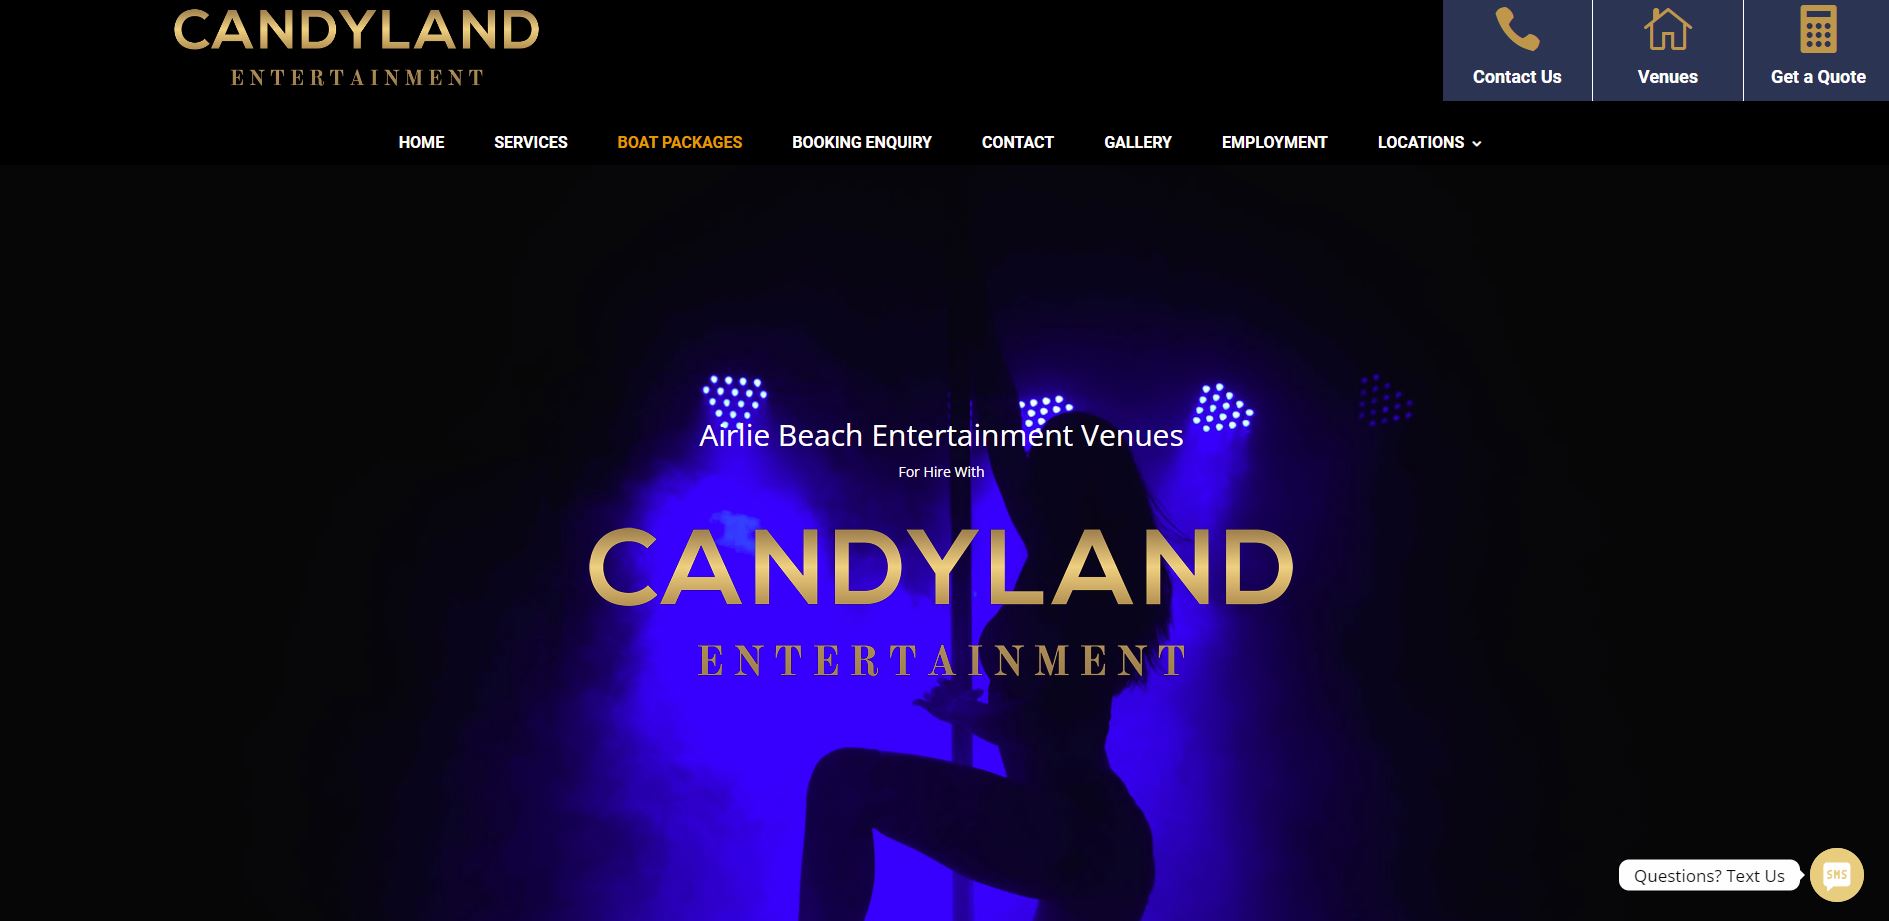 Candyland Entertainment 